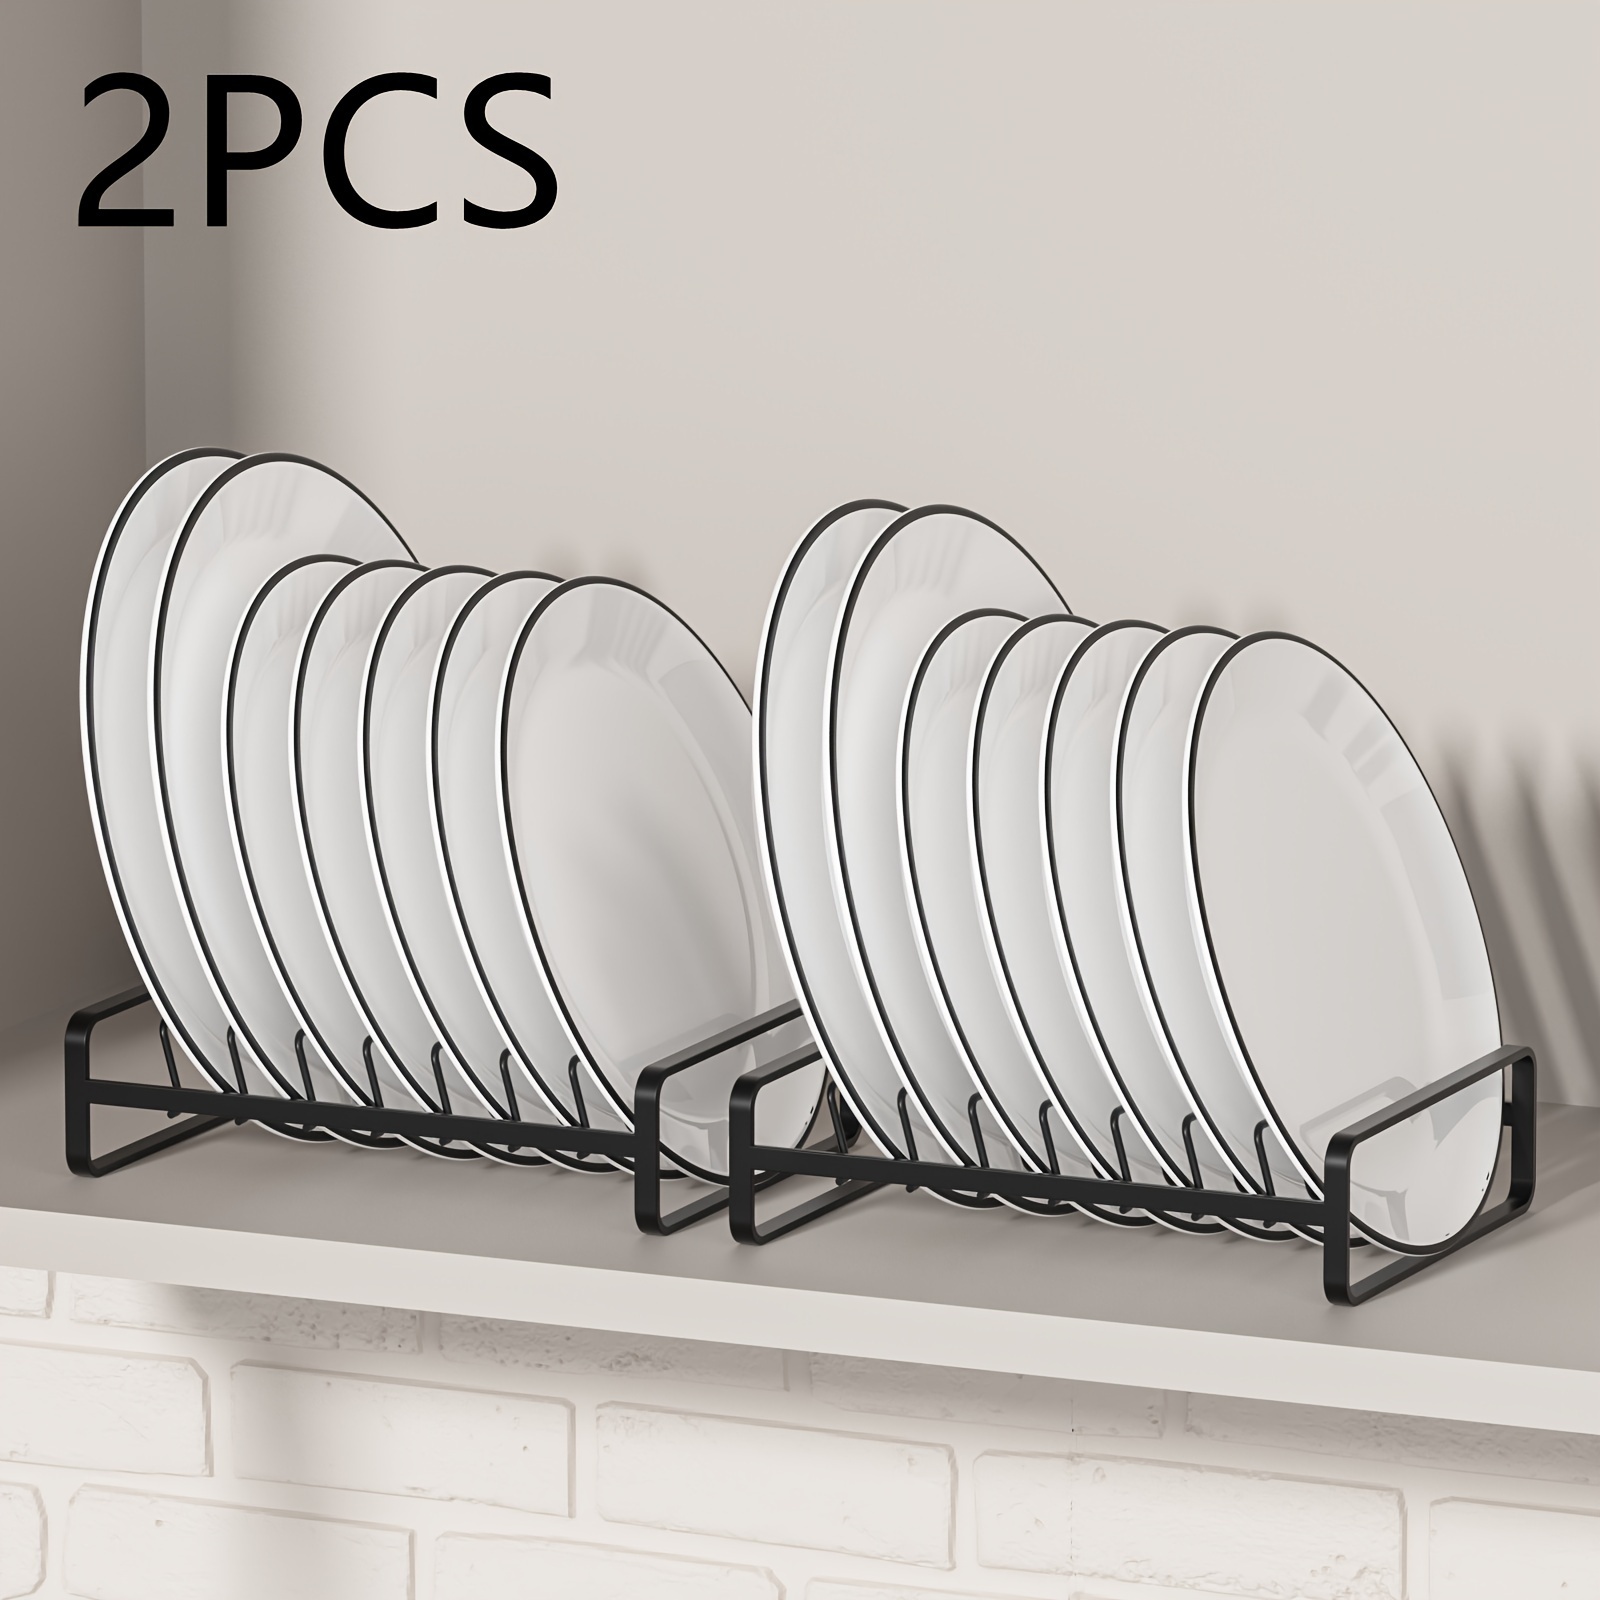 

1pc Plate Holders, Countertop Multi-line Dish Drying Racks, Household Vertical Metal Plate Organizers, For Kitchen Countertop And Cupboard, Kitchen Organizers And Storage, Kitchen Accessories